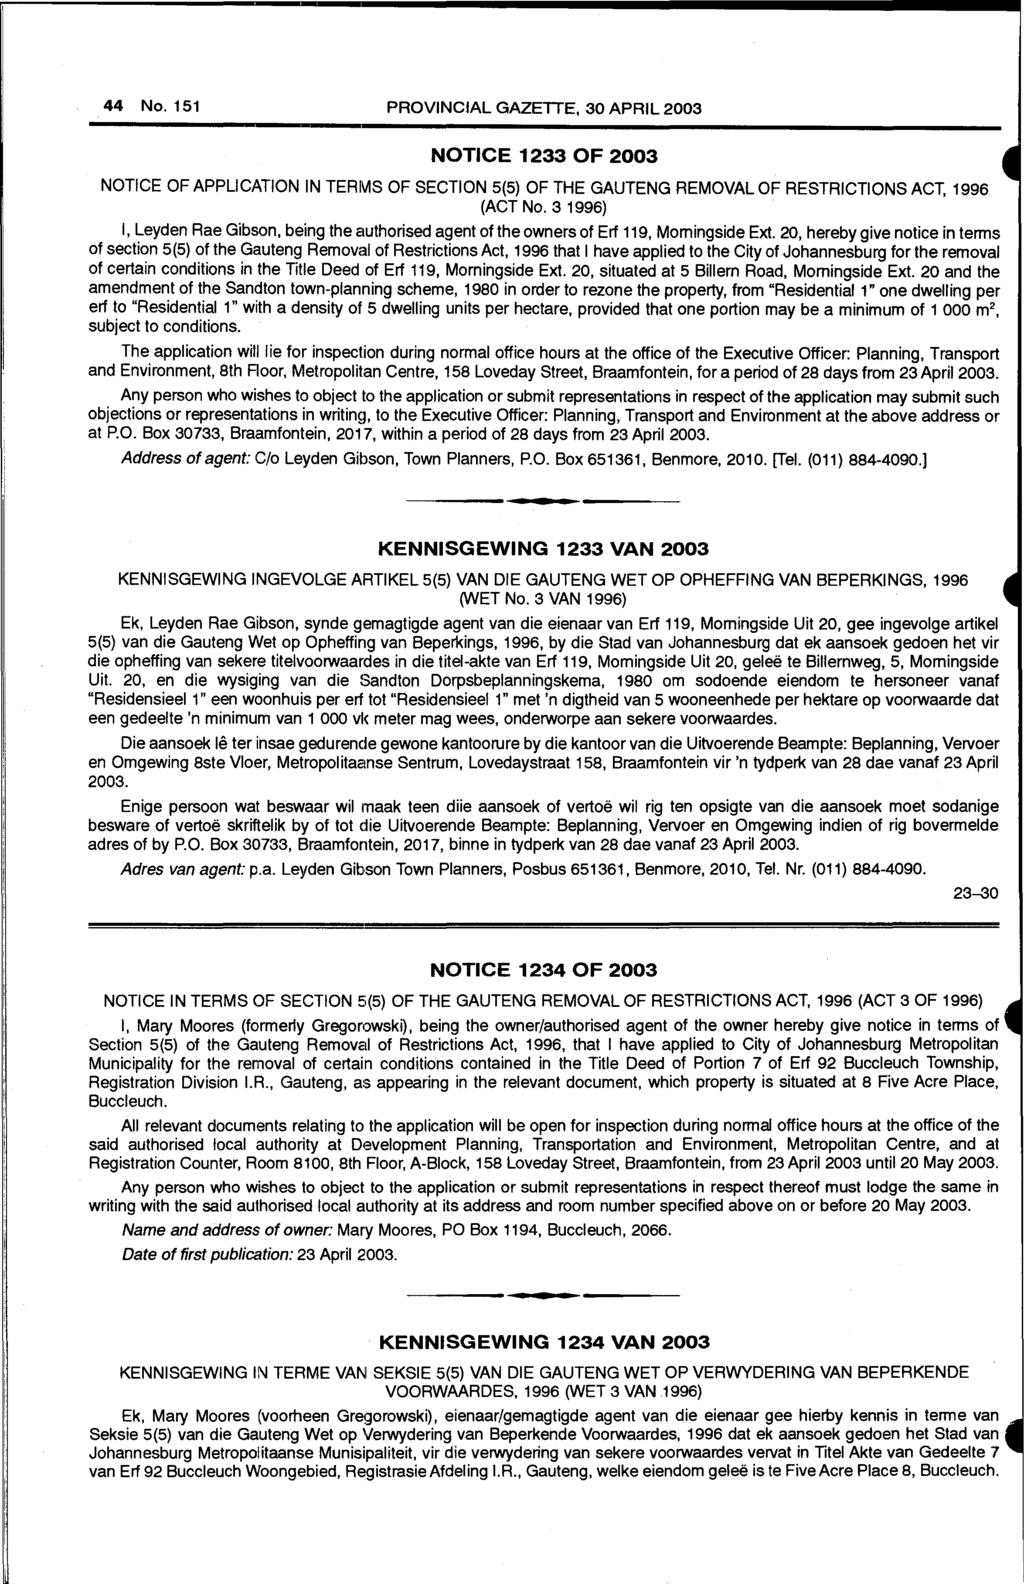 44 No. 151 PROVINCIAL GAZETTE, 30 APRIL 2003 NOTICE 1233 OF 2003 NOTICE OF APPLICATION IN TERMS OF SECTION 5(5) OF THE GAUTENG REMOVAL OF RESTRICTIONS ACT, 1996 (ACT No.